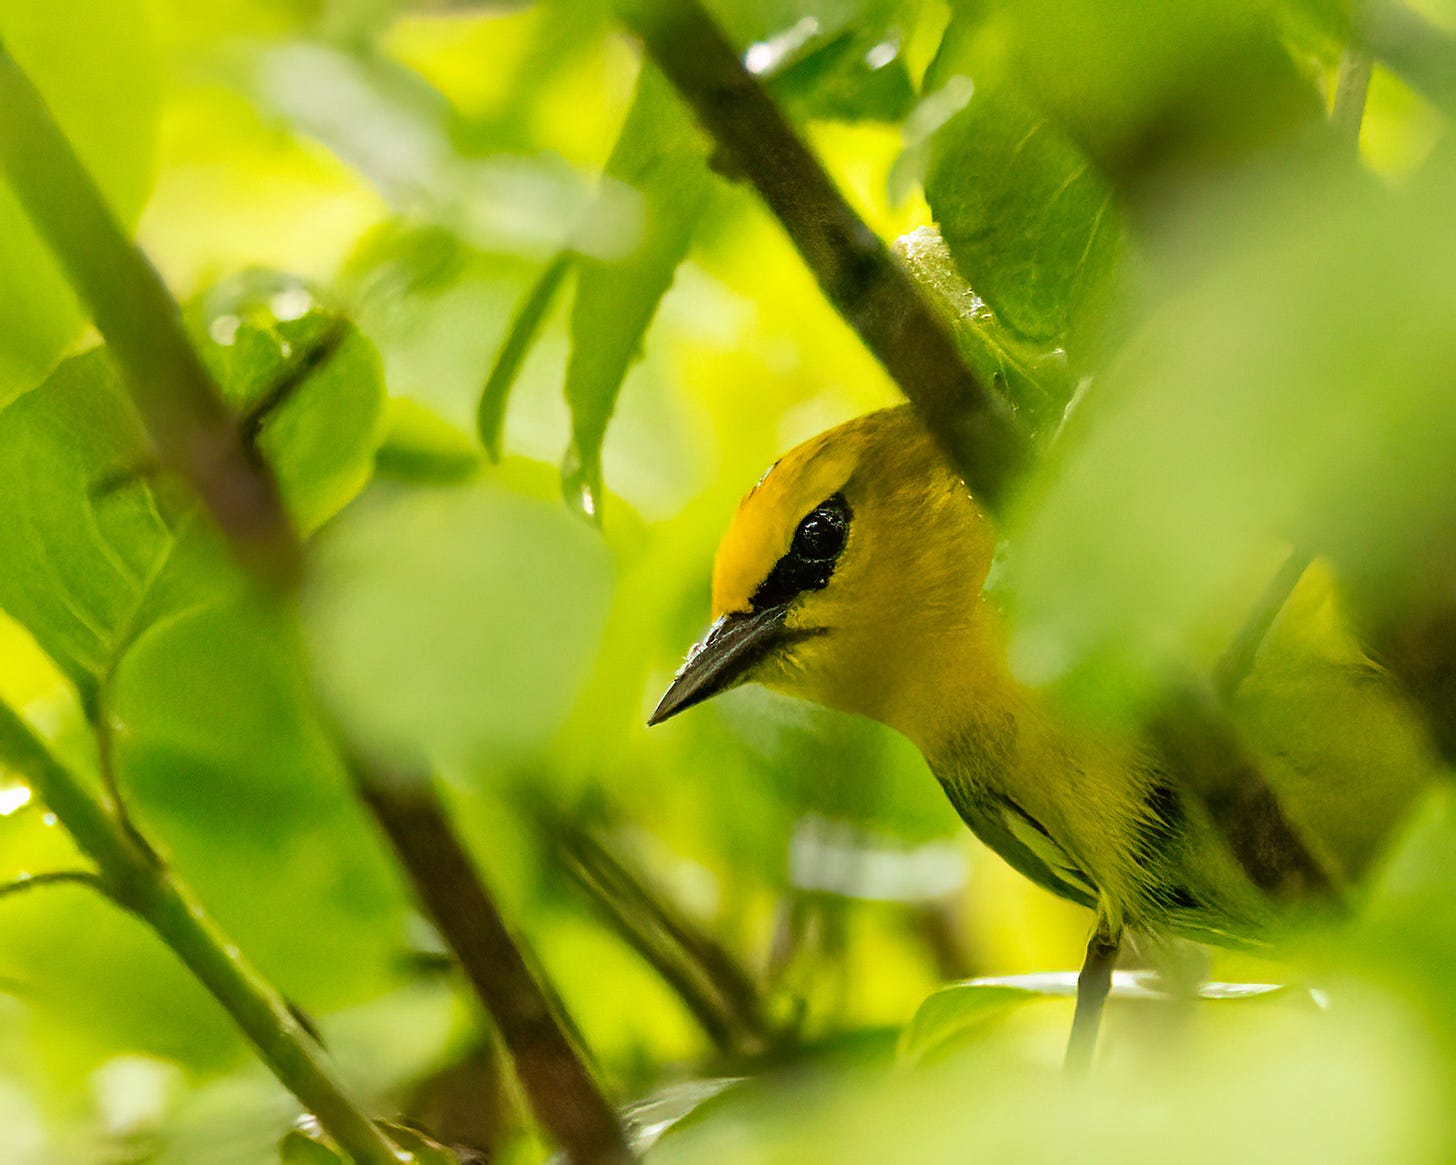 A blue winged warbler peers out from behind the leaves. This warbler is mostly bright yellow with a black stripe through his eye.